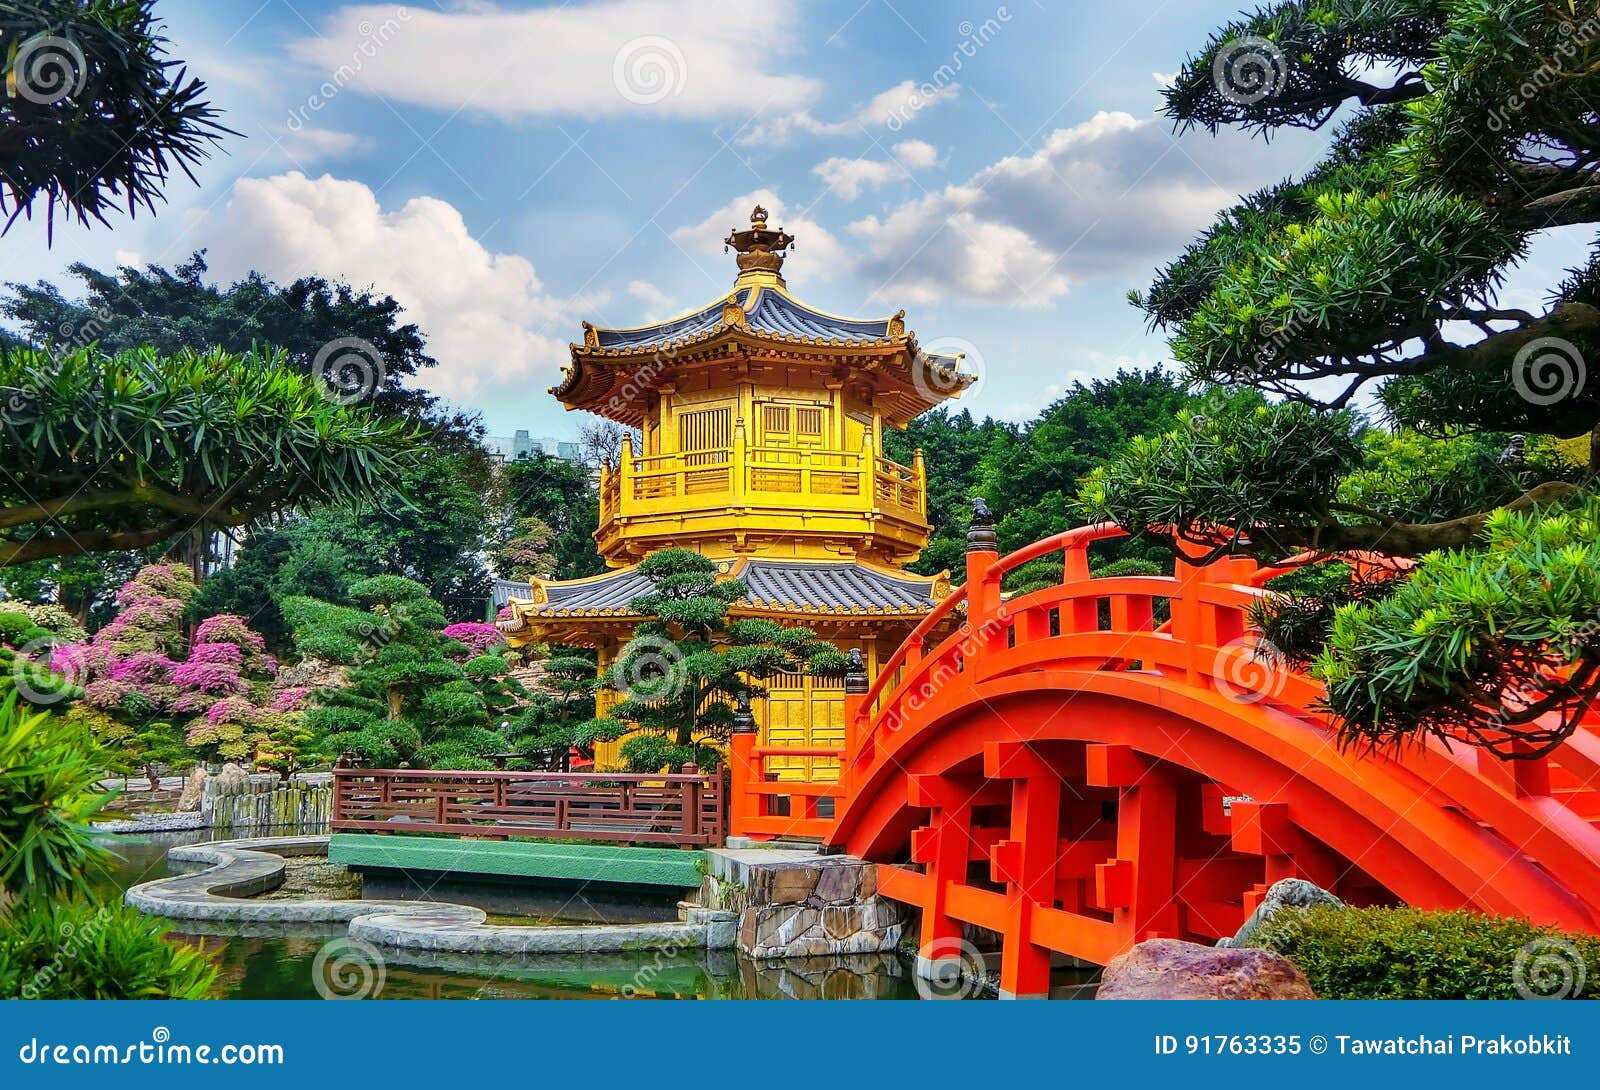 the golden pavilion of absolute perfection in nan lian garden in chi lin nunnery.